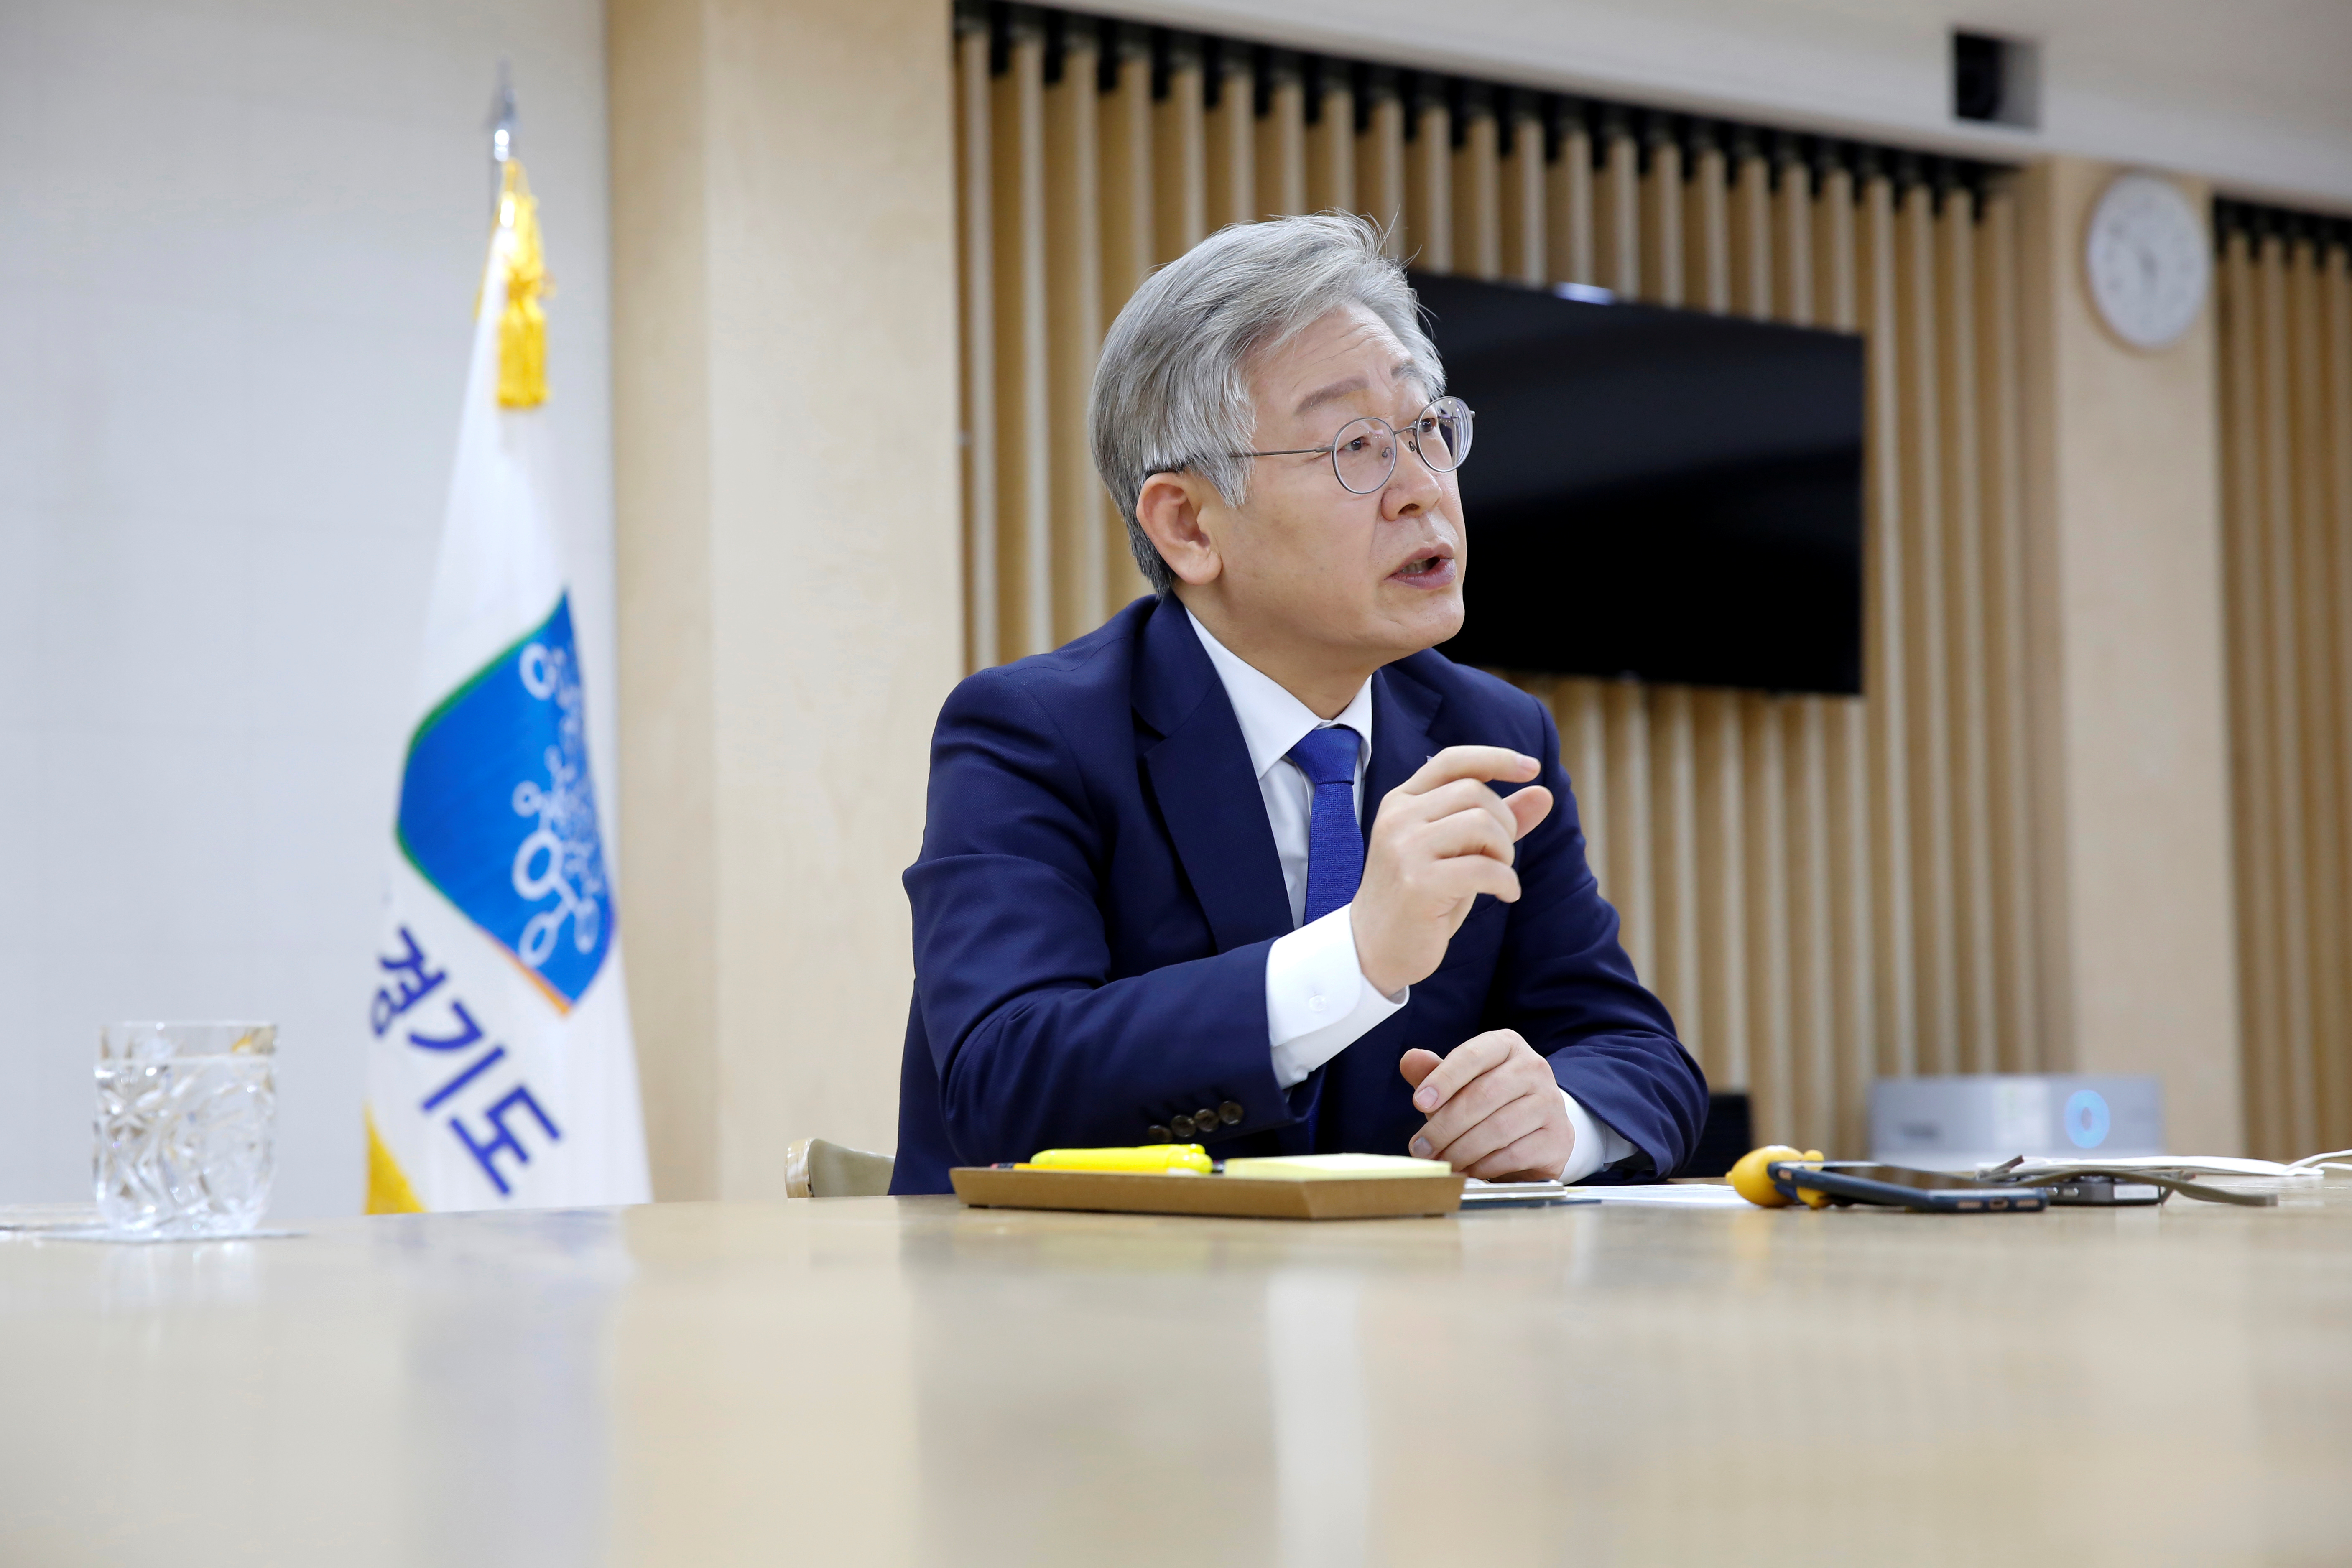 Gyeonggi Province Governor Lee Jae-myung speaks during an interview with Reuters in Suwon